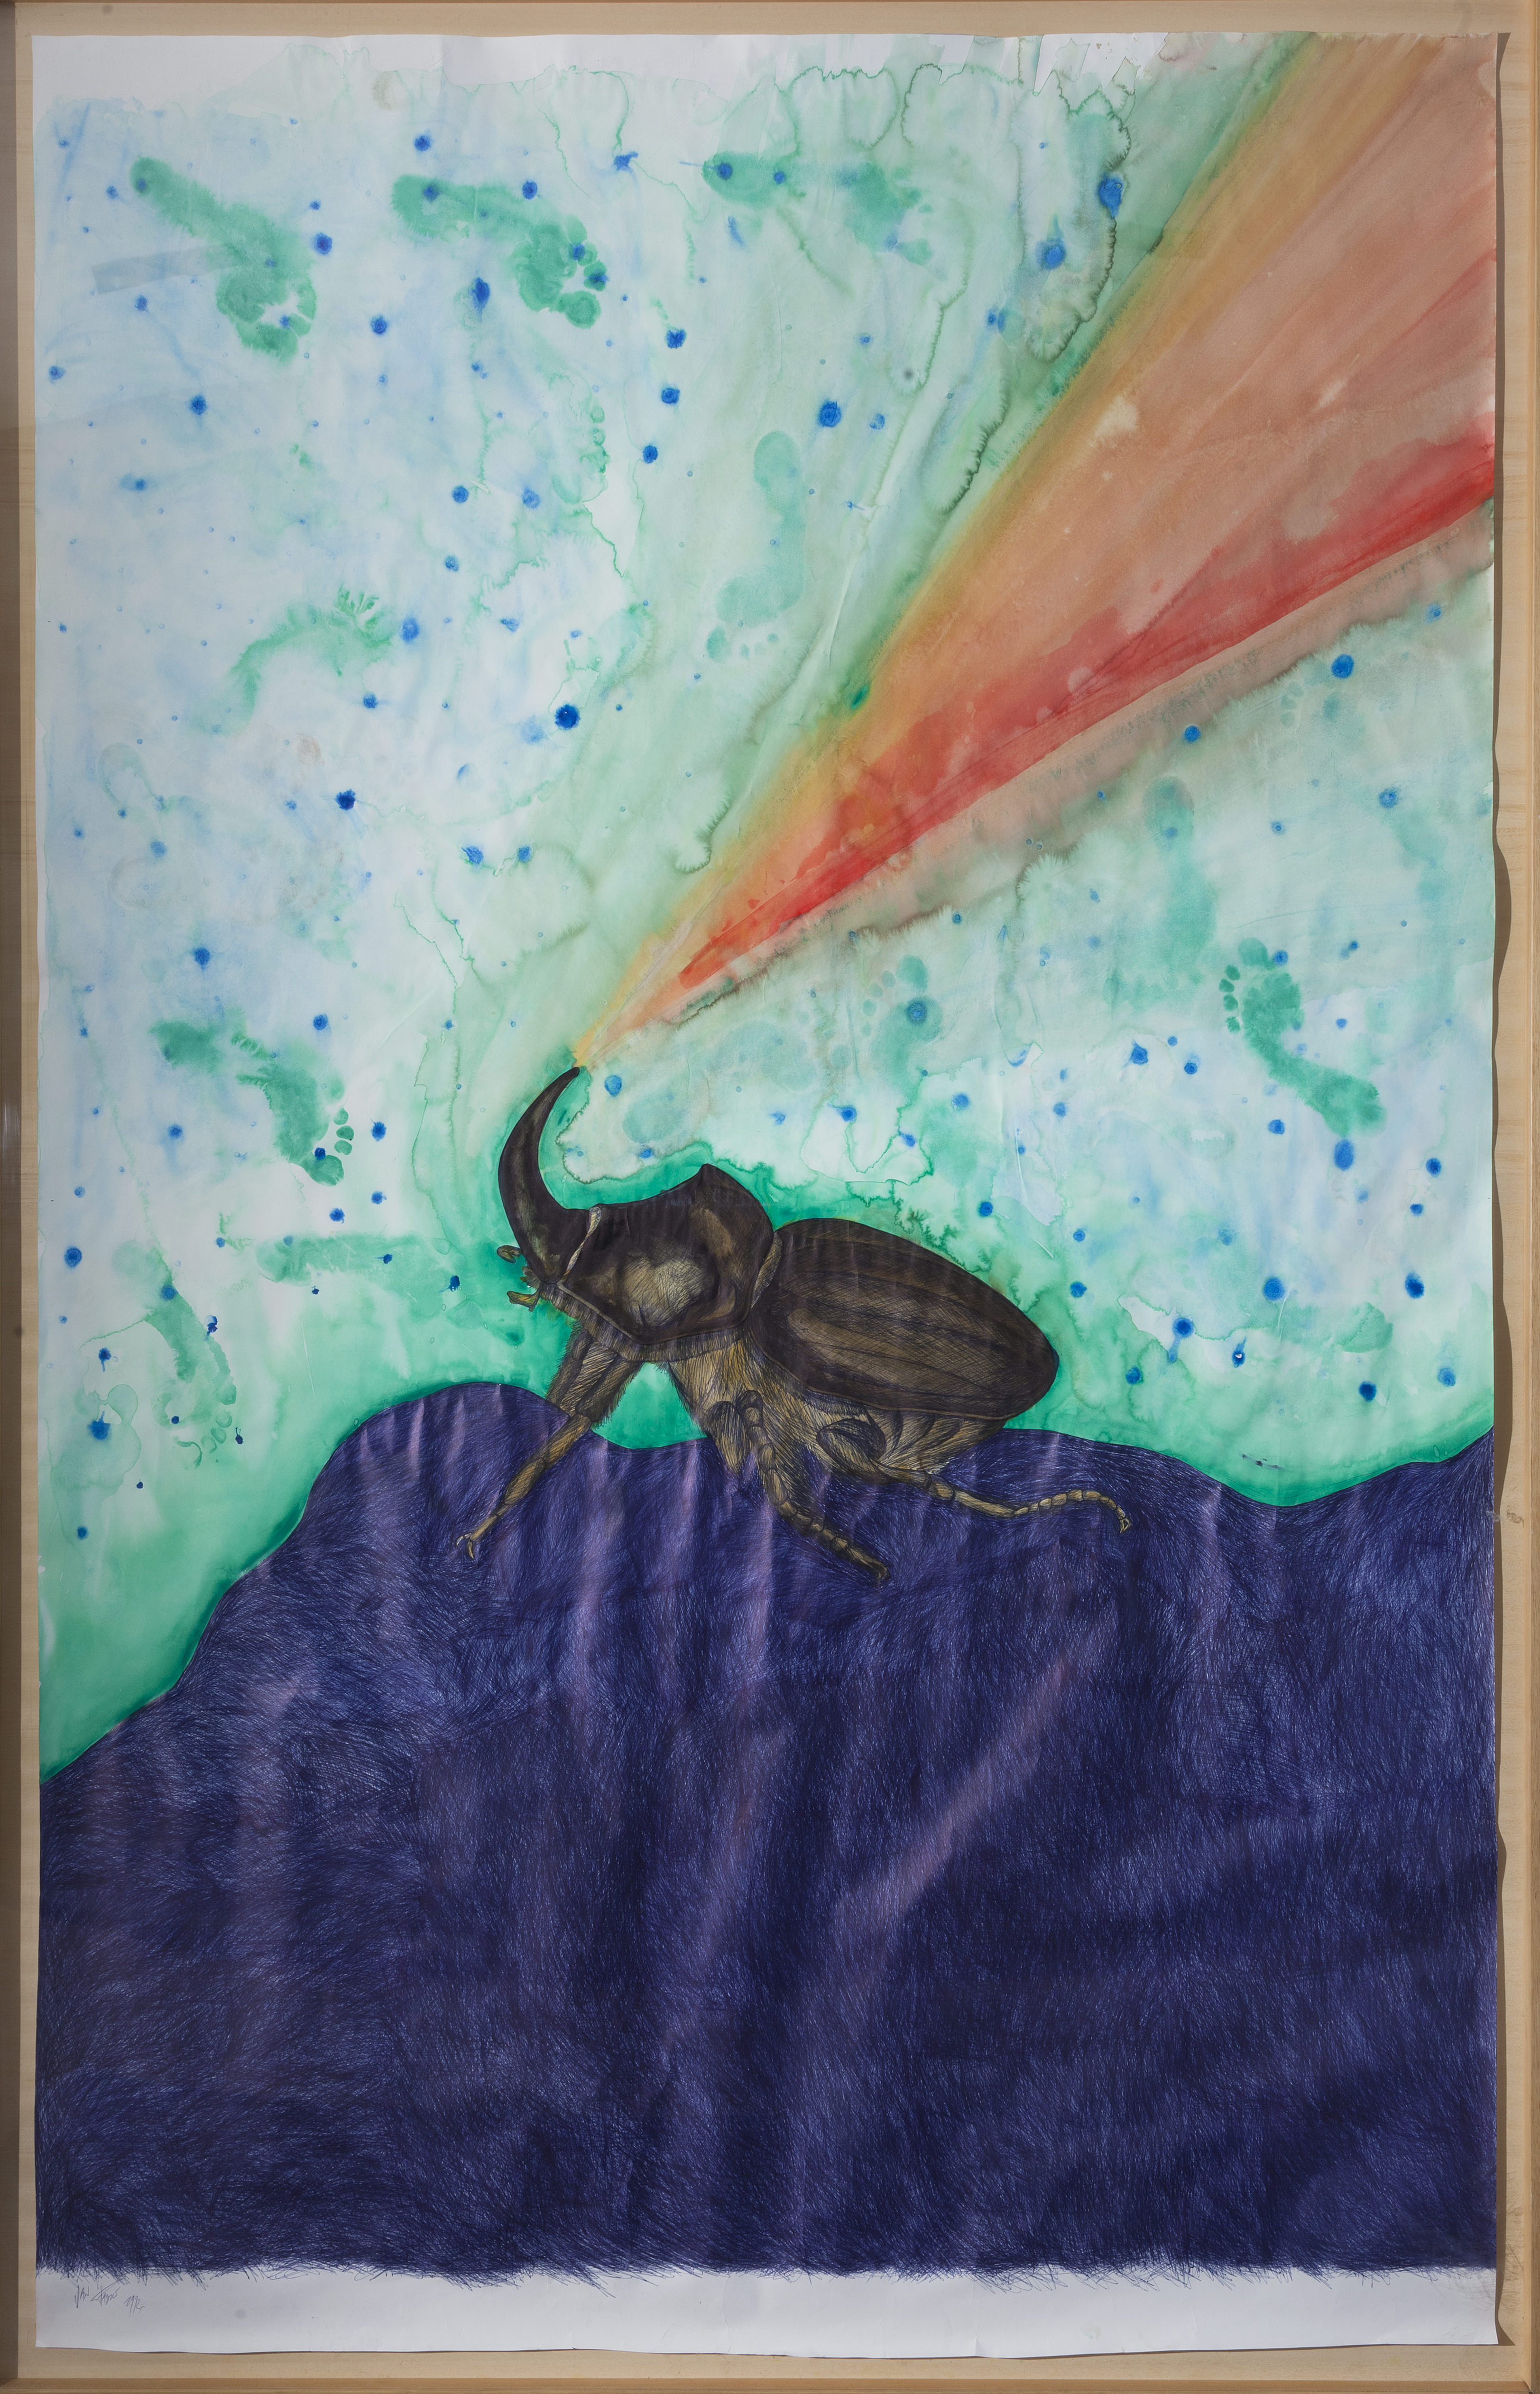 Jan Fabre  Rhinoceros beetle in state of war (series: Metamorphoses), 1992  bic ball-point pen and watercolor on paper 236 x 150 cm